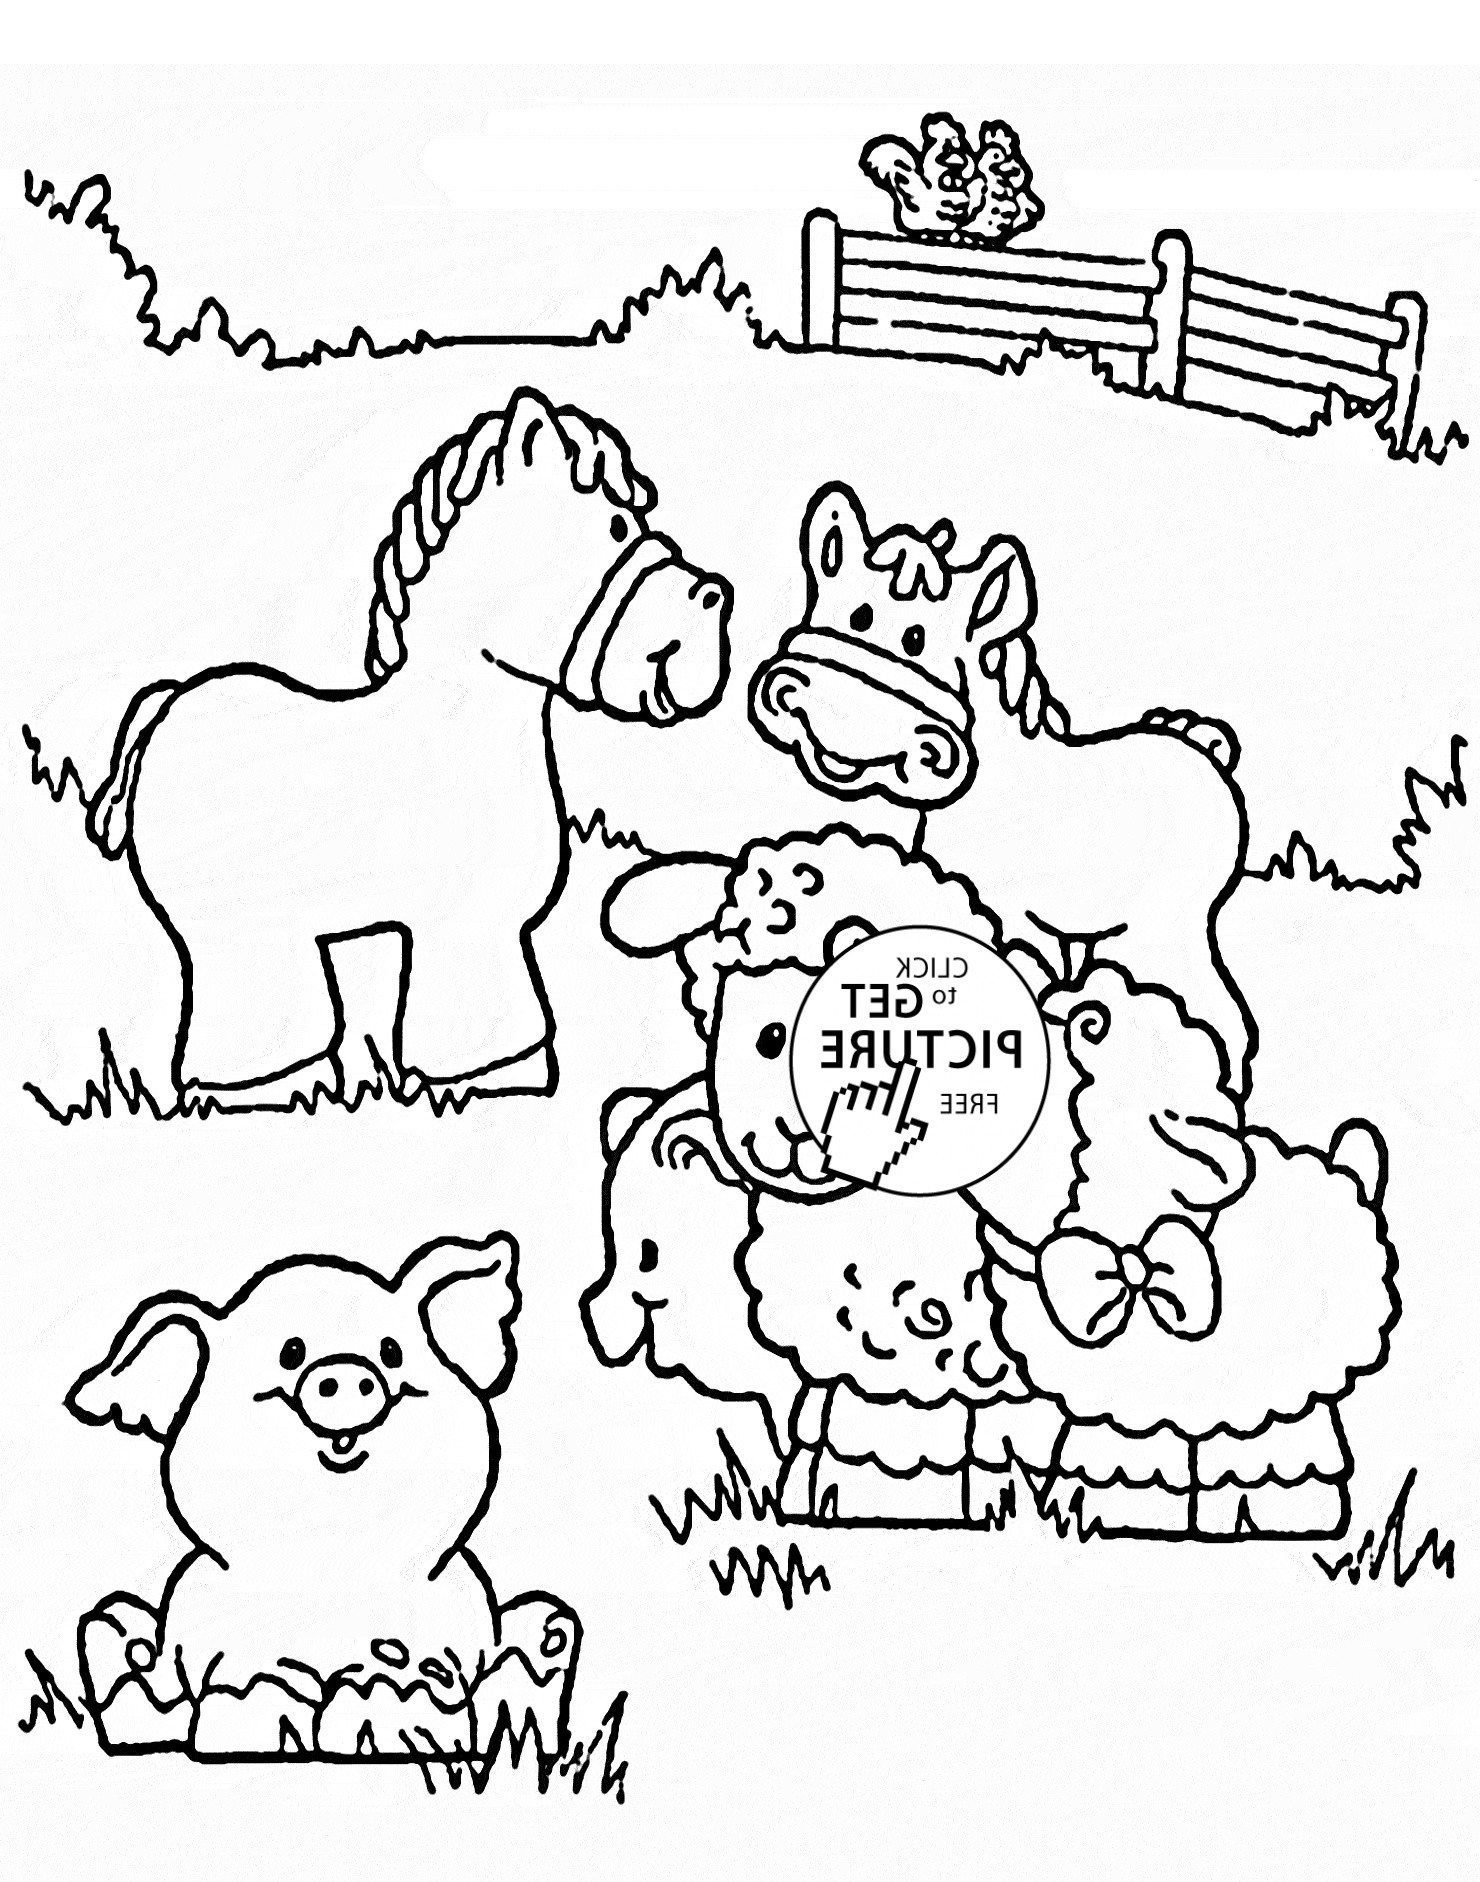 cute dolphin coloring page elegant stock funny farm animals coloring page for kids animal coloring pages of cute dolphin coloring page